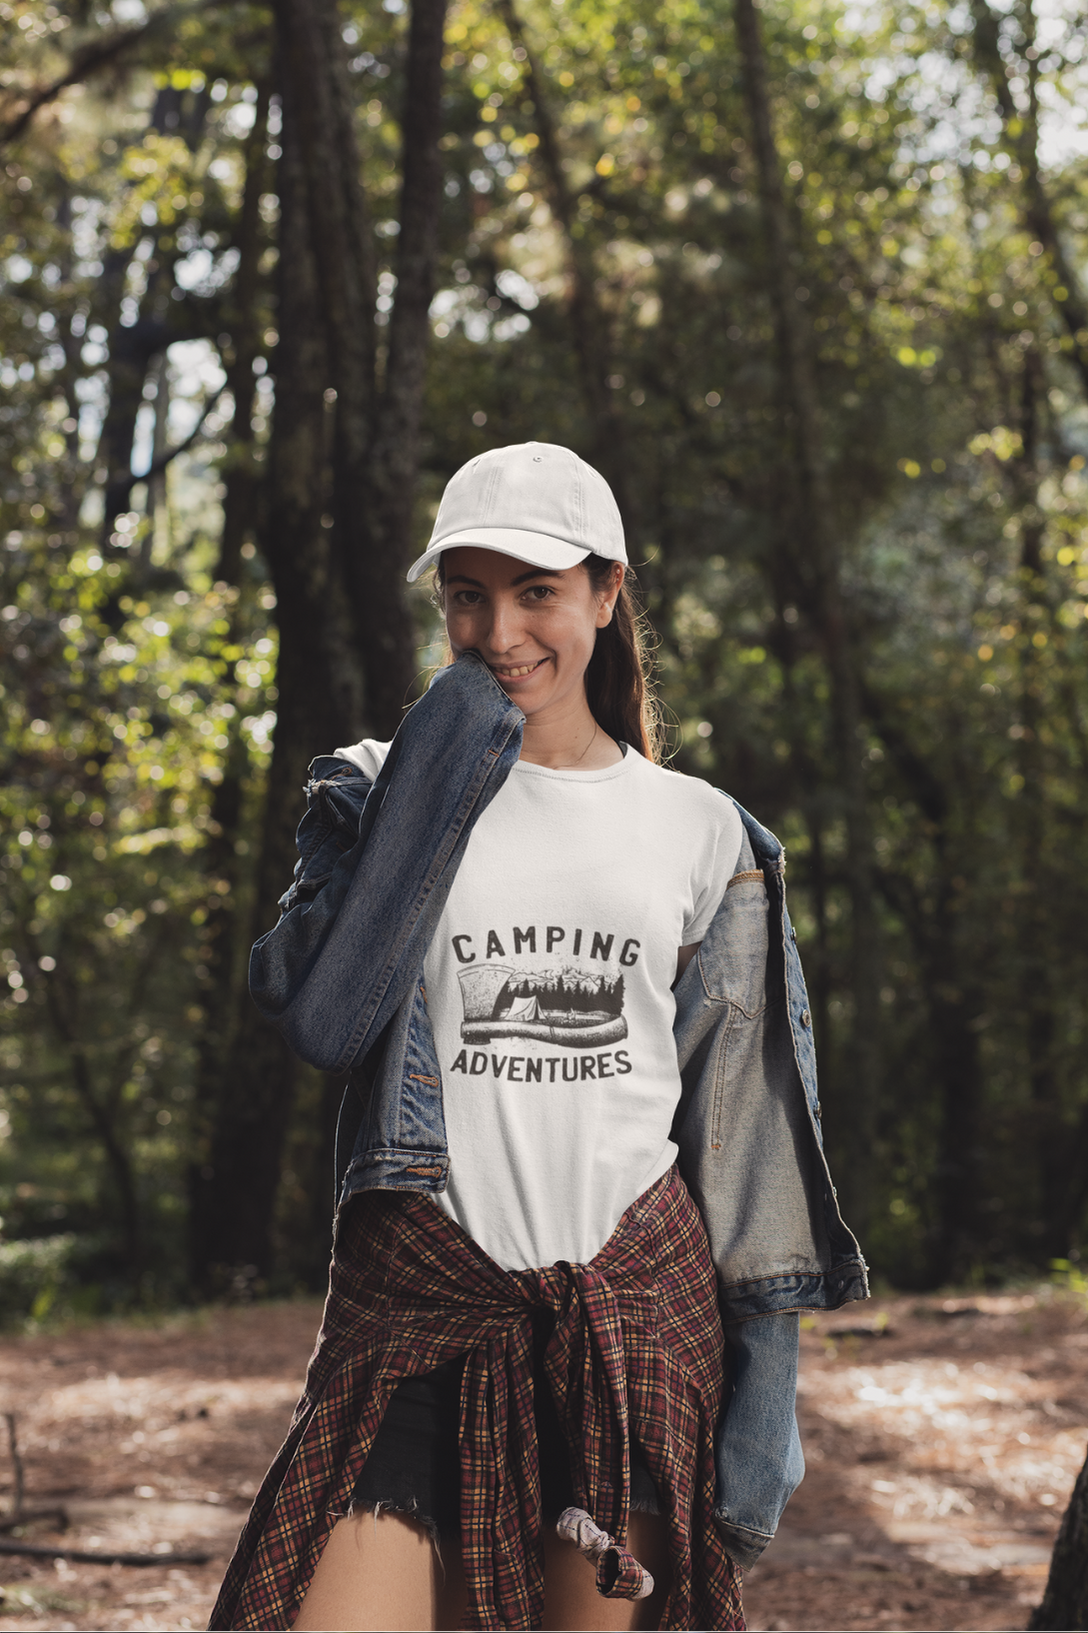 Camping Adventures Printed T-Shirt For Women - WowWaves - 4